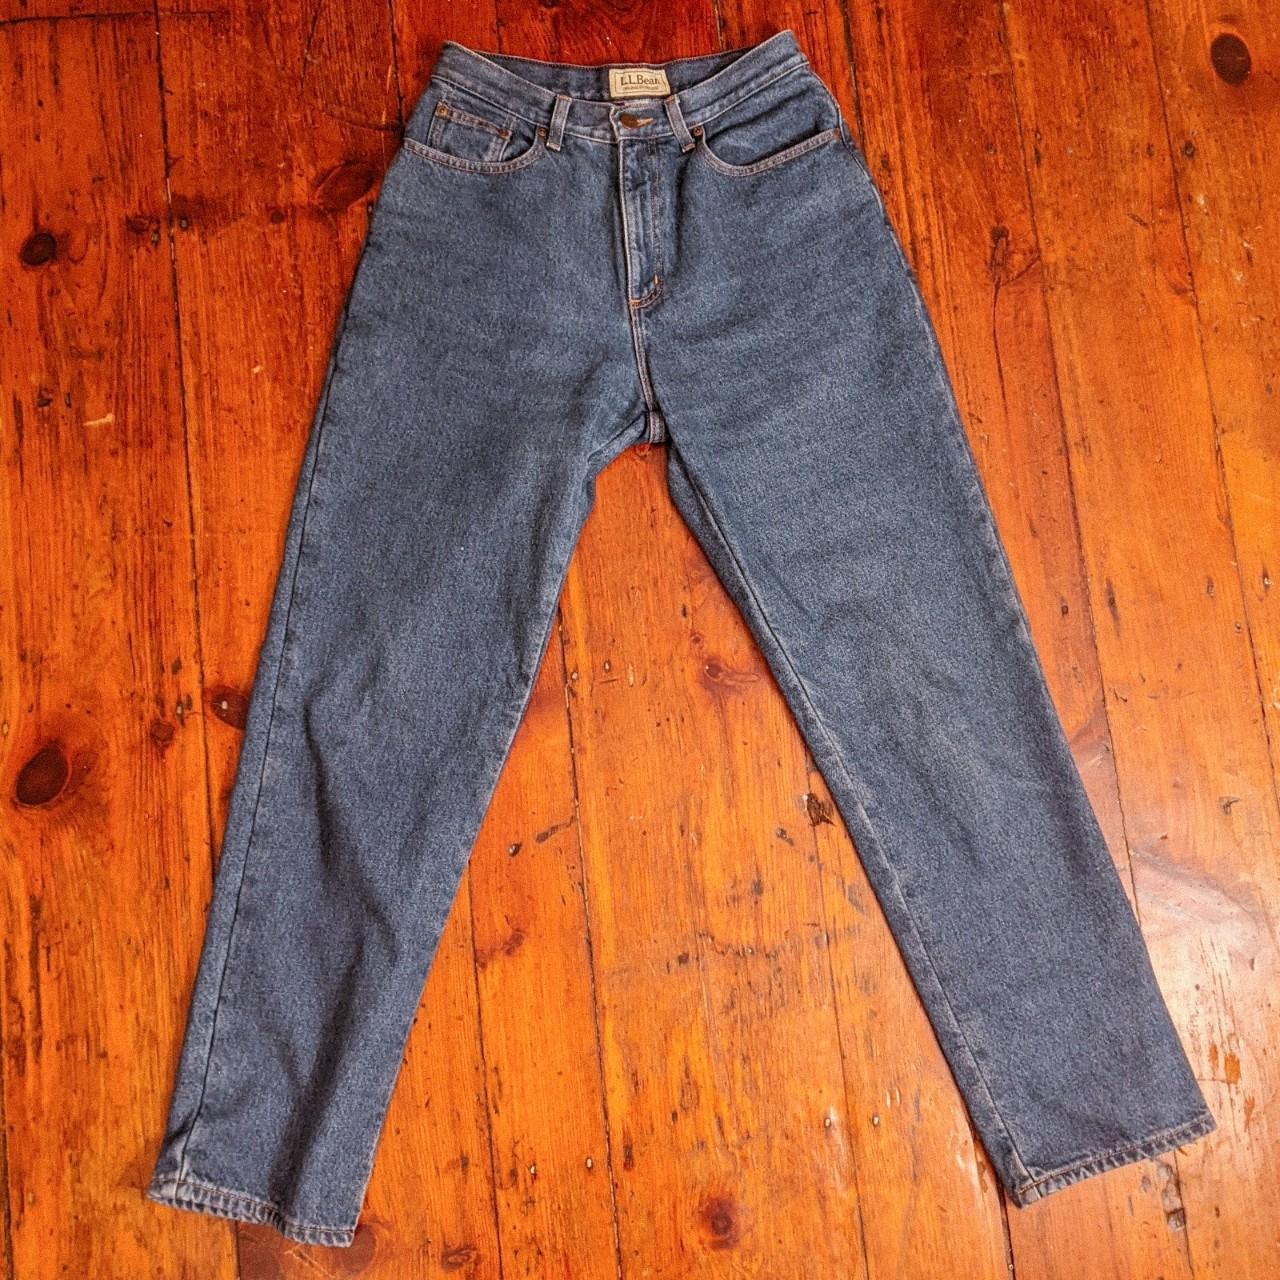 L.L.Bean Women's Blue and Red Jeans | Depop